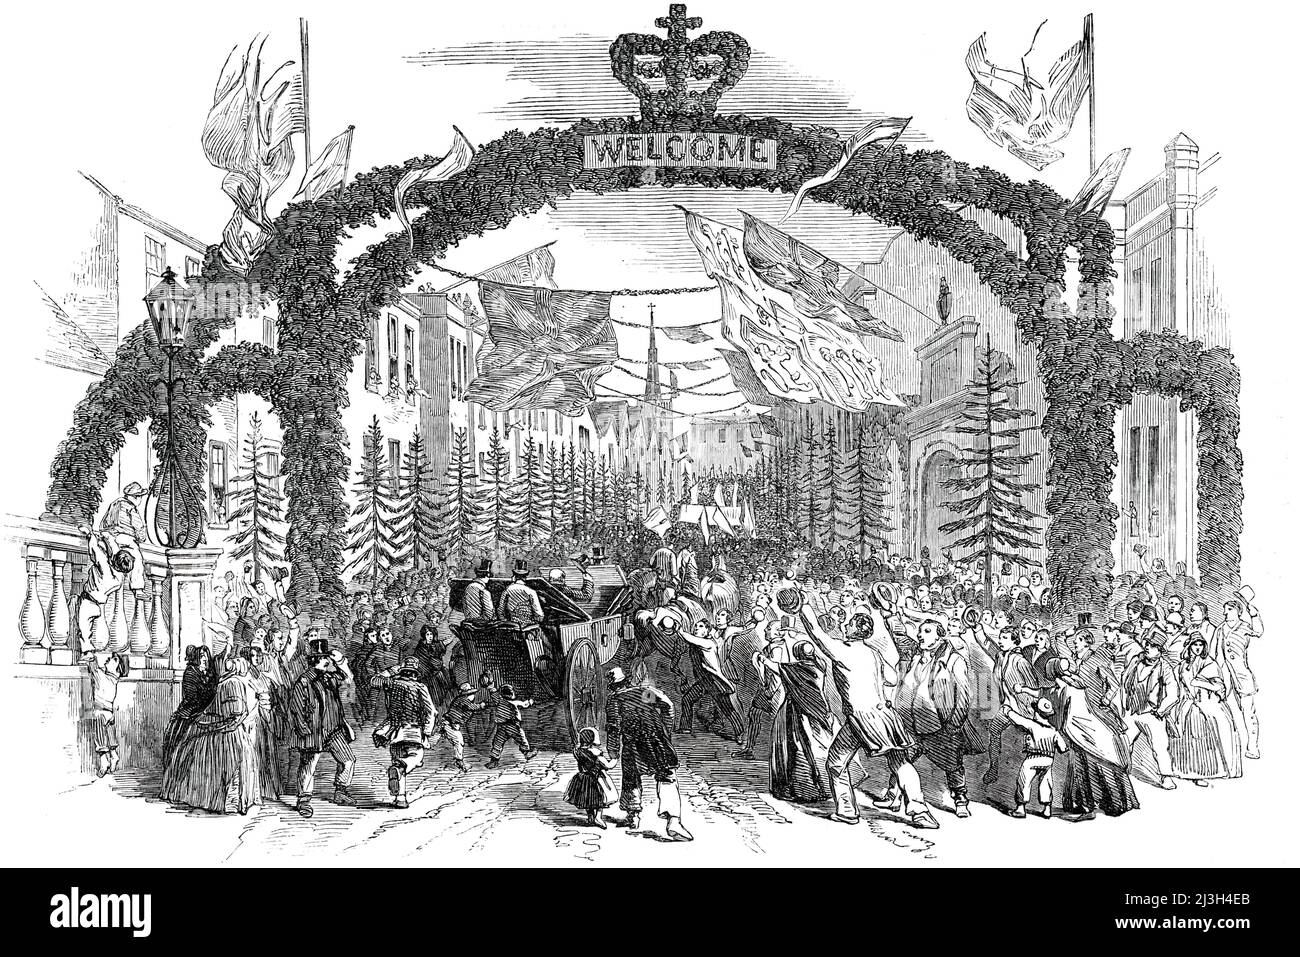 Festivities at Chippenham [in Wiltshire] - the High-Street, from the Bridge - Arrival of Mr. Neeld, M.P., 1850. Locals welcome their MP Joseph Neeld to celebrate the opening of the town's new cheese market, funded by Neeld. 'The whole of that part of the town through which the procession was expected to pass presented the appearance of rejoicings for some great triumph. Fir trees, planted for the occasion, lined the streets and road; festoons of evergreens and flowers extended across the streets in thick succession...[there was] a triumphal arch, surmounted by flags, and the word &quot;Welcome Stock Photo